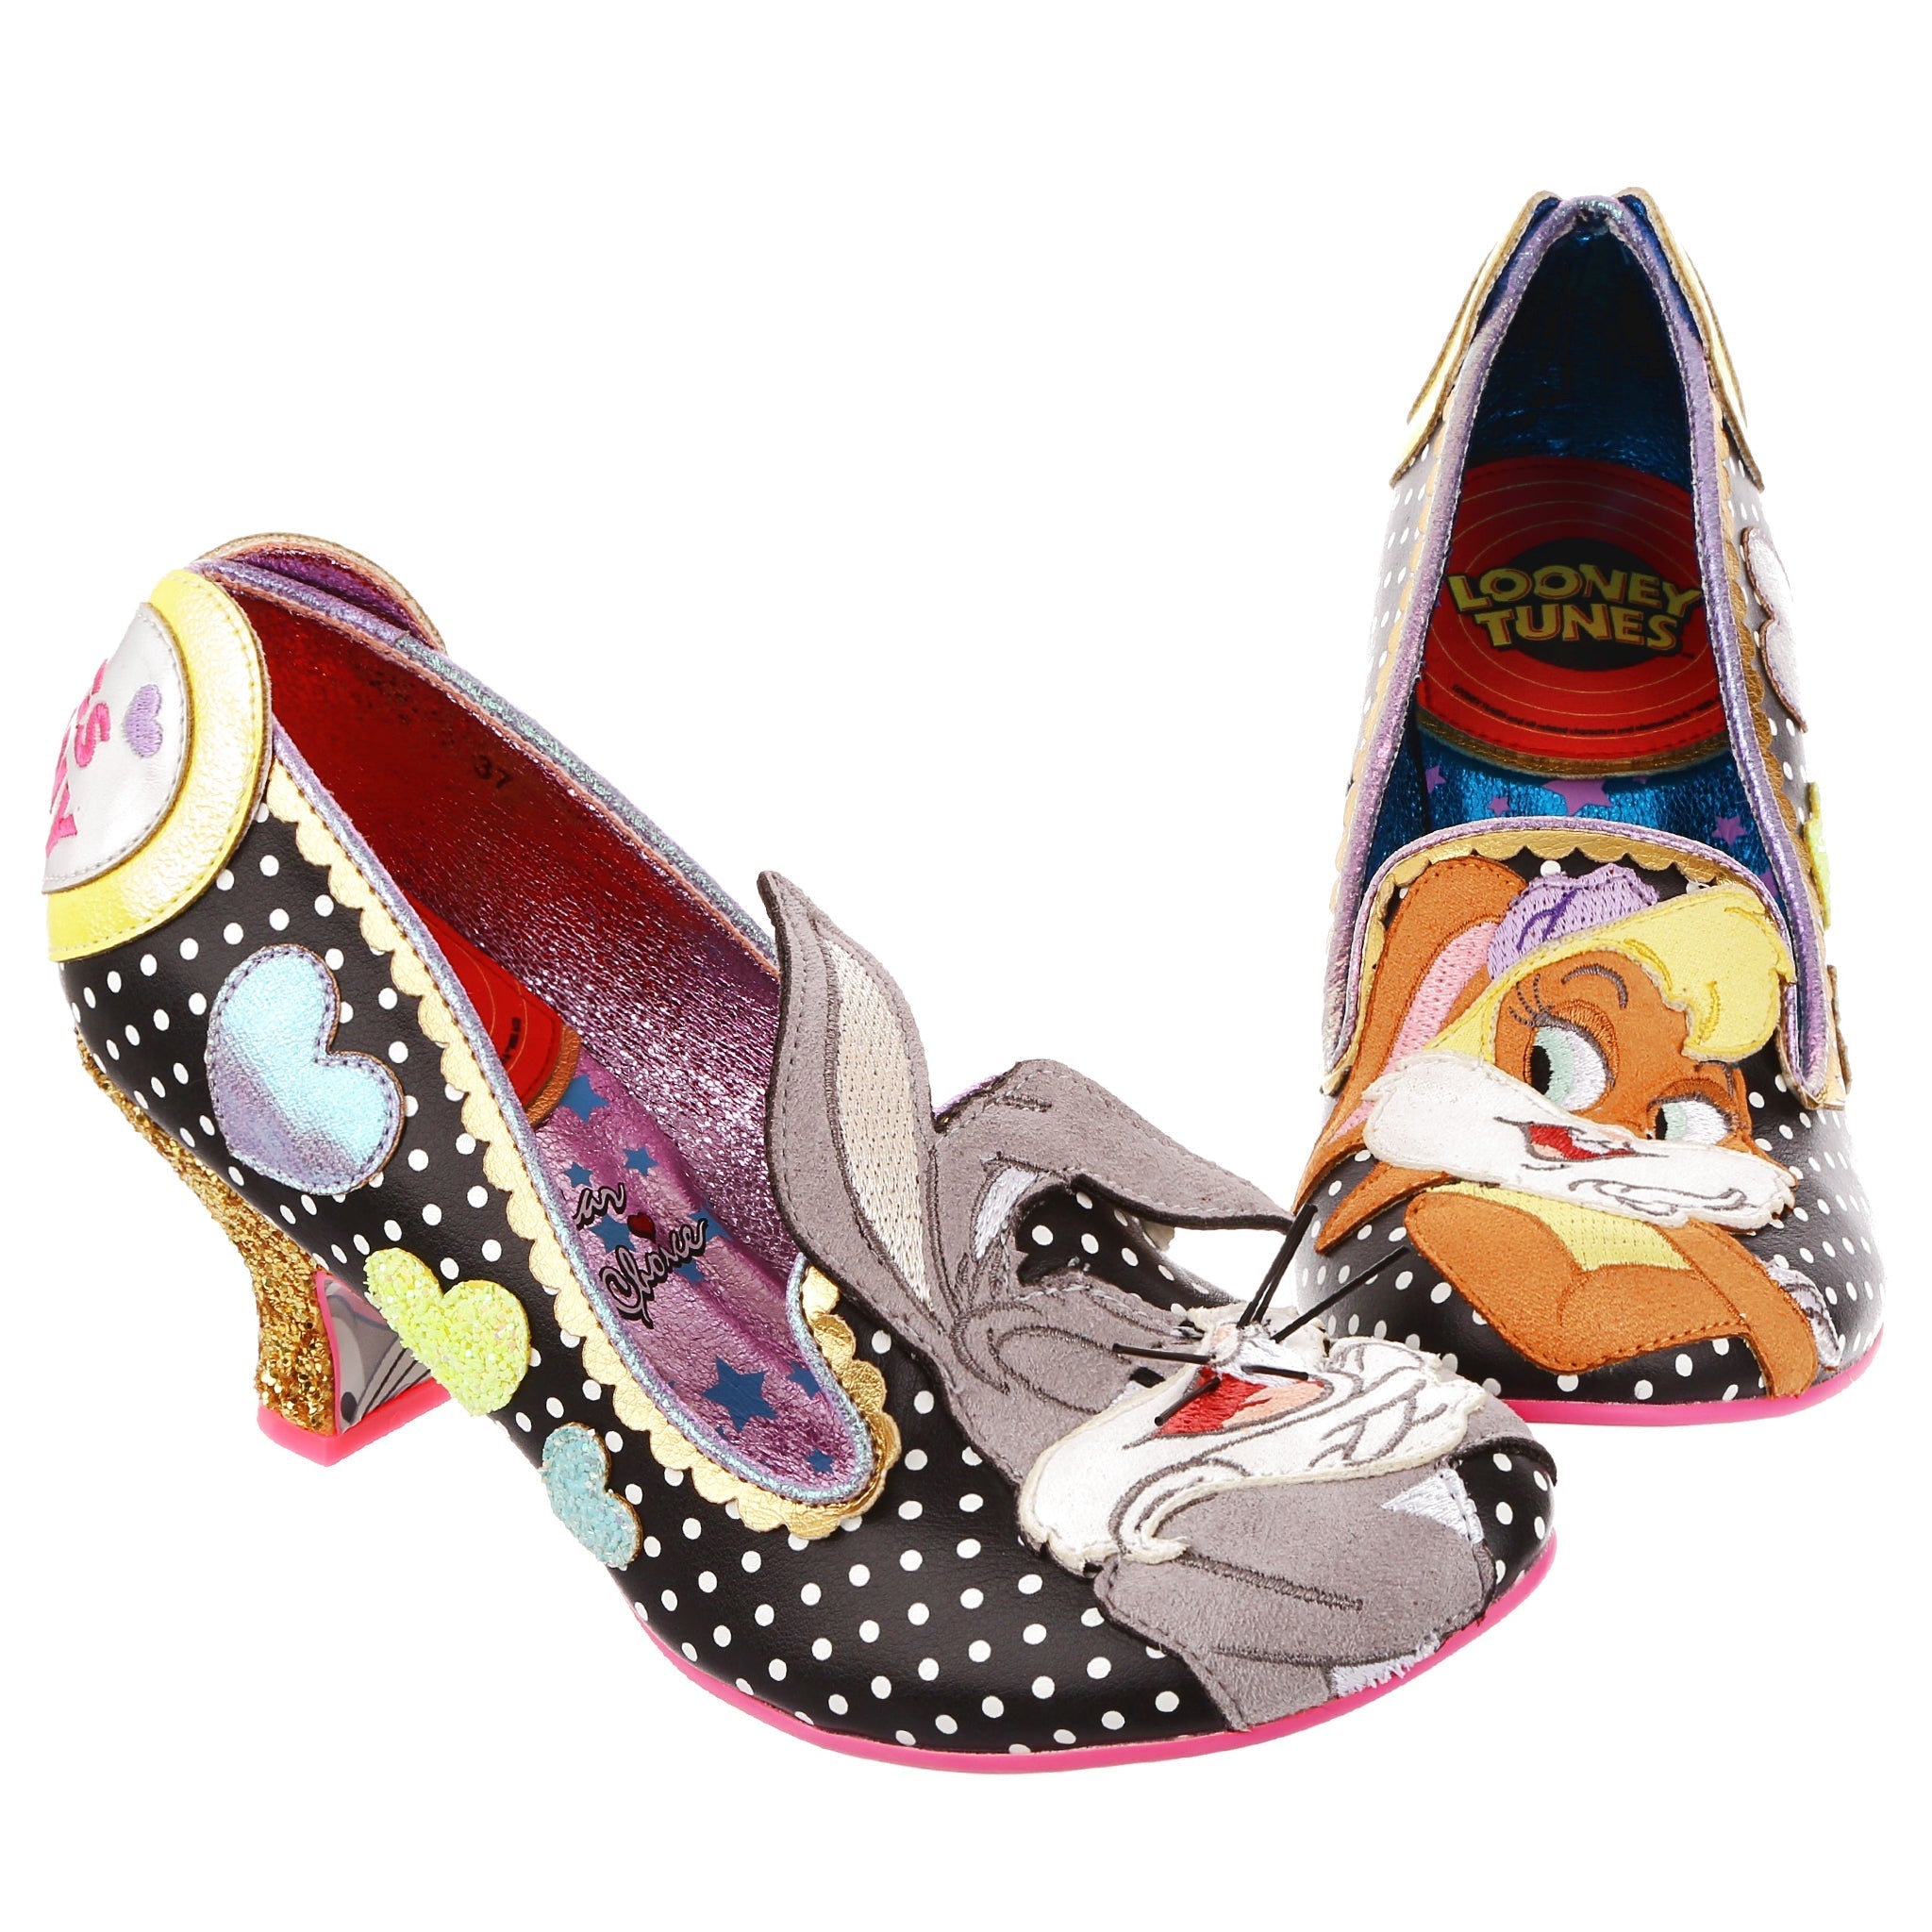 A black and white polka dot with pastel glitter hearts, gold scalloping and Bugs Bunny appliqued on the right toe and Lola Bunny on the left toe. At the heel are hearts embroidered with their names inside, and a gold glitter mid heel.